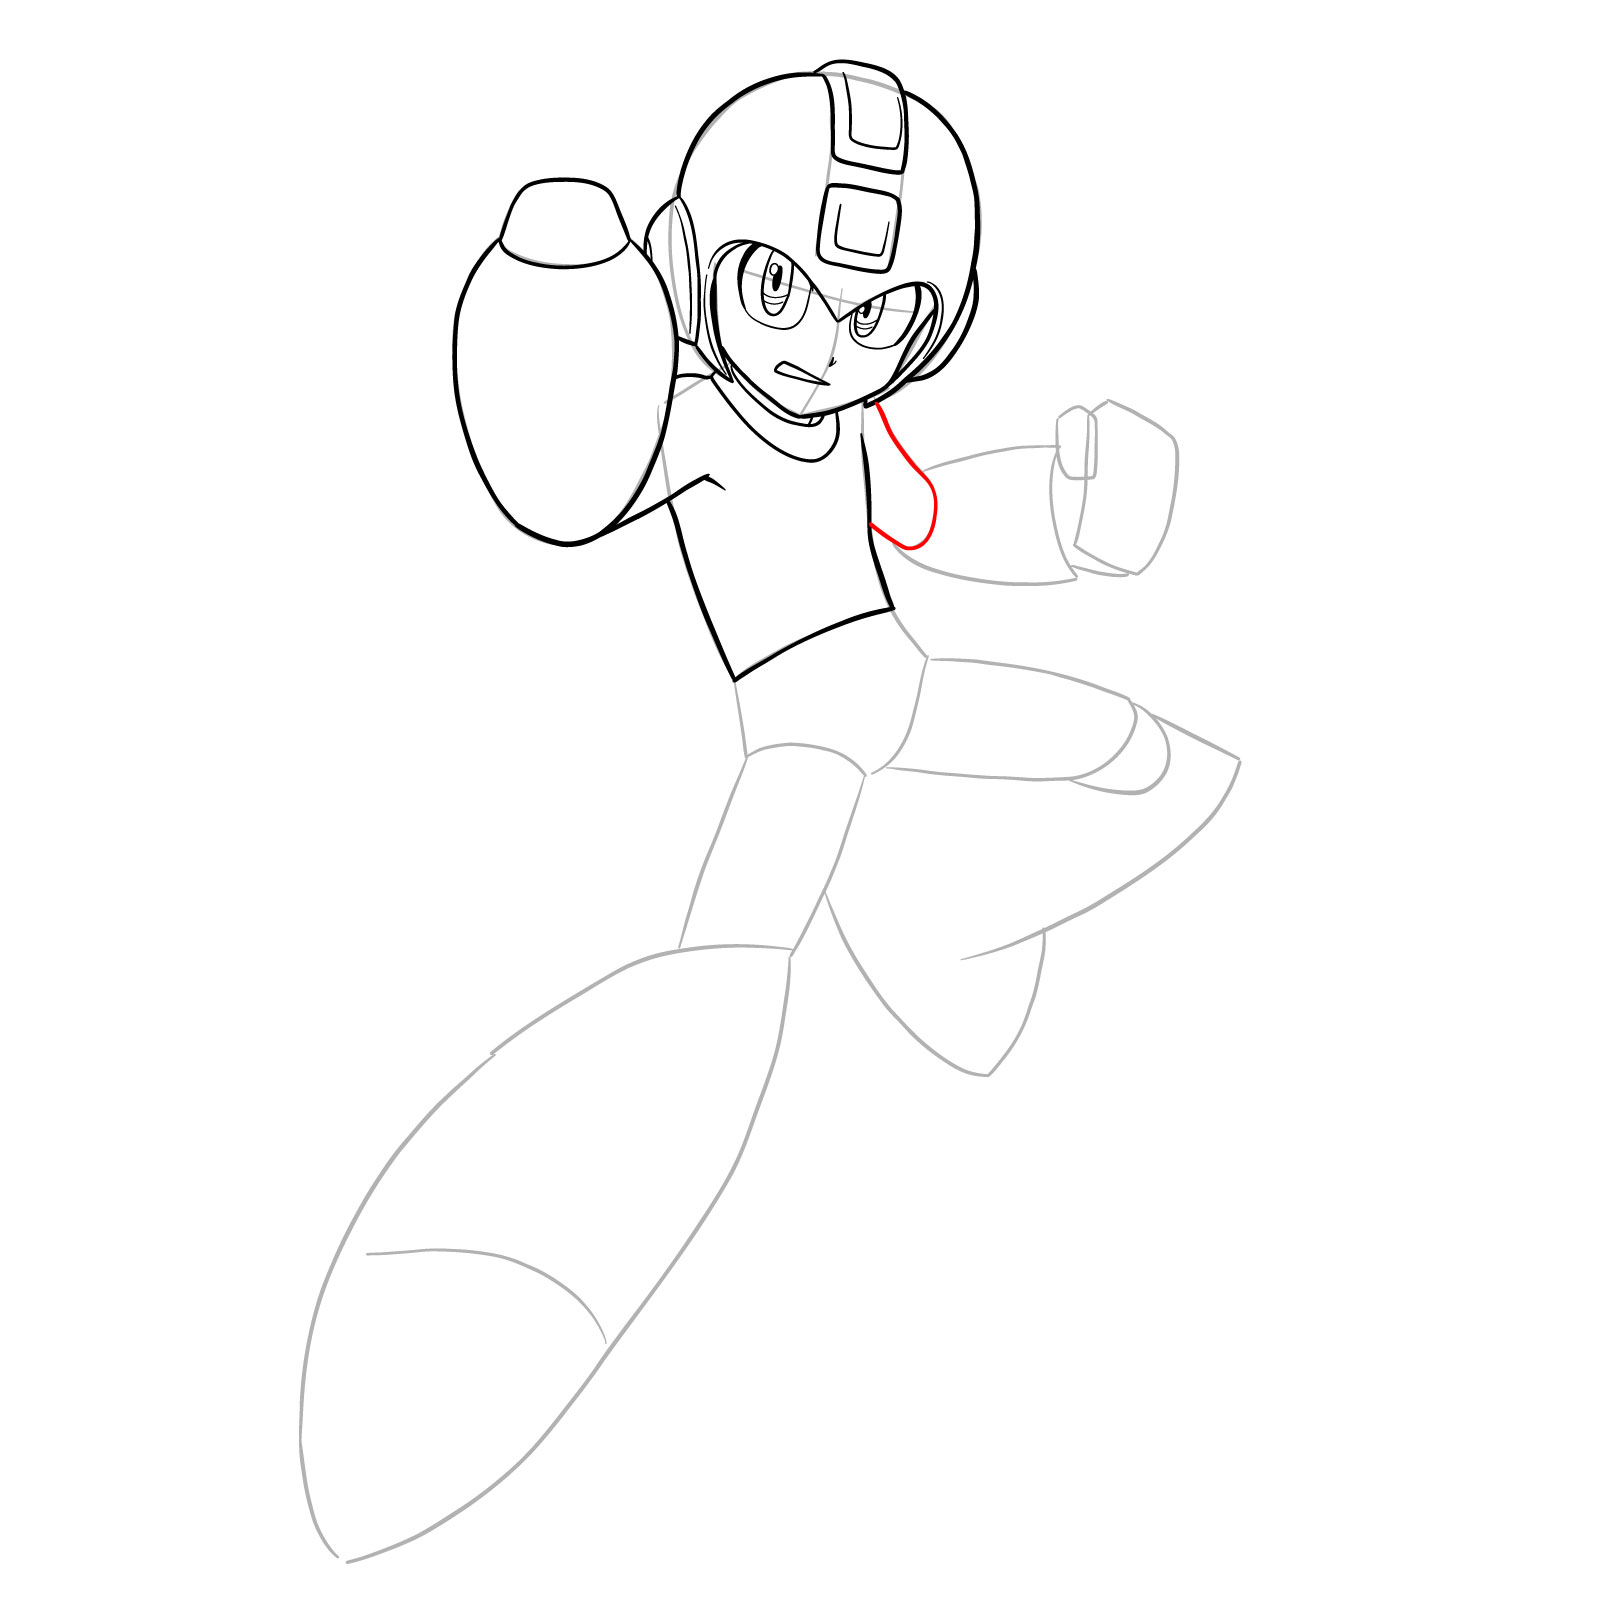 How to draw Mega Man from the 11th game - step 17